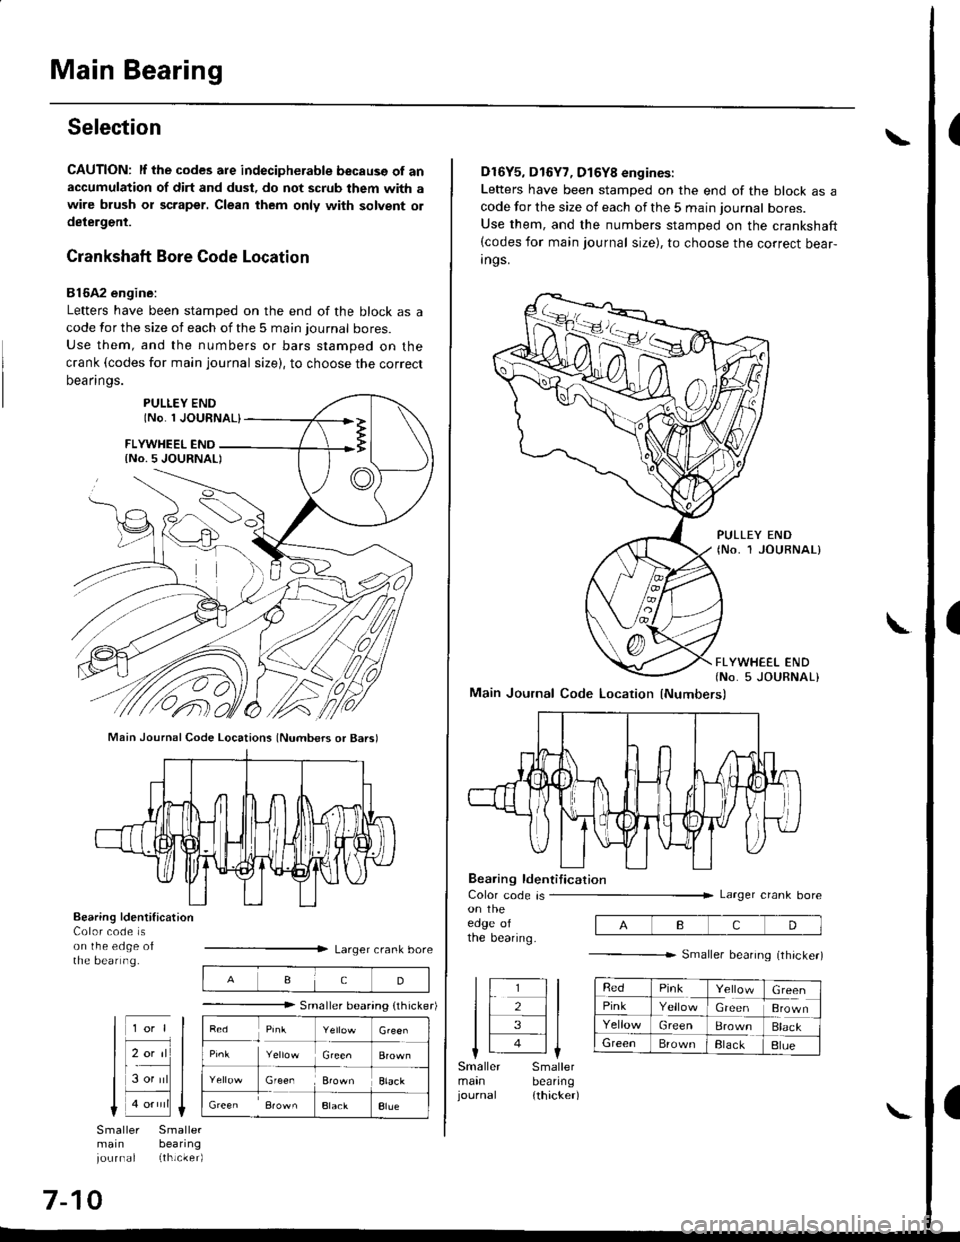 HONDA CIVIC 1996 6.G Owners Guide Main Bearing
Selection
CAUTION: lf the codes are indecipherable because of anaccumulation of dirt and dust, do not scrub them with a
wire brush or scraper. Clean them only with solvent ol
deiergent.
C